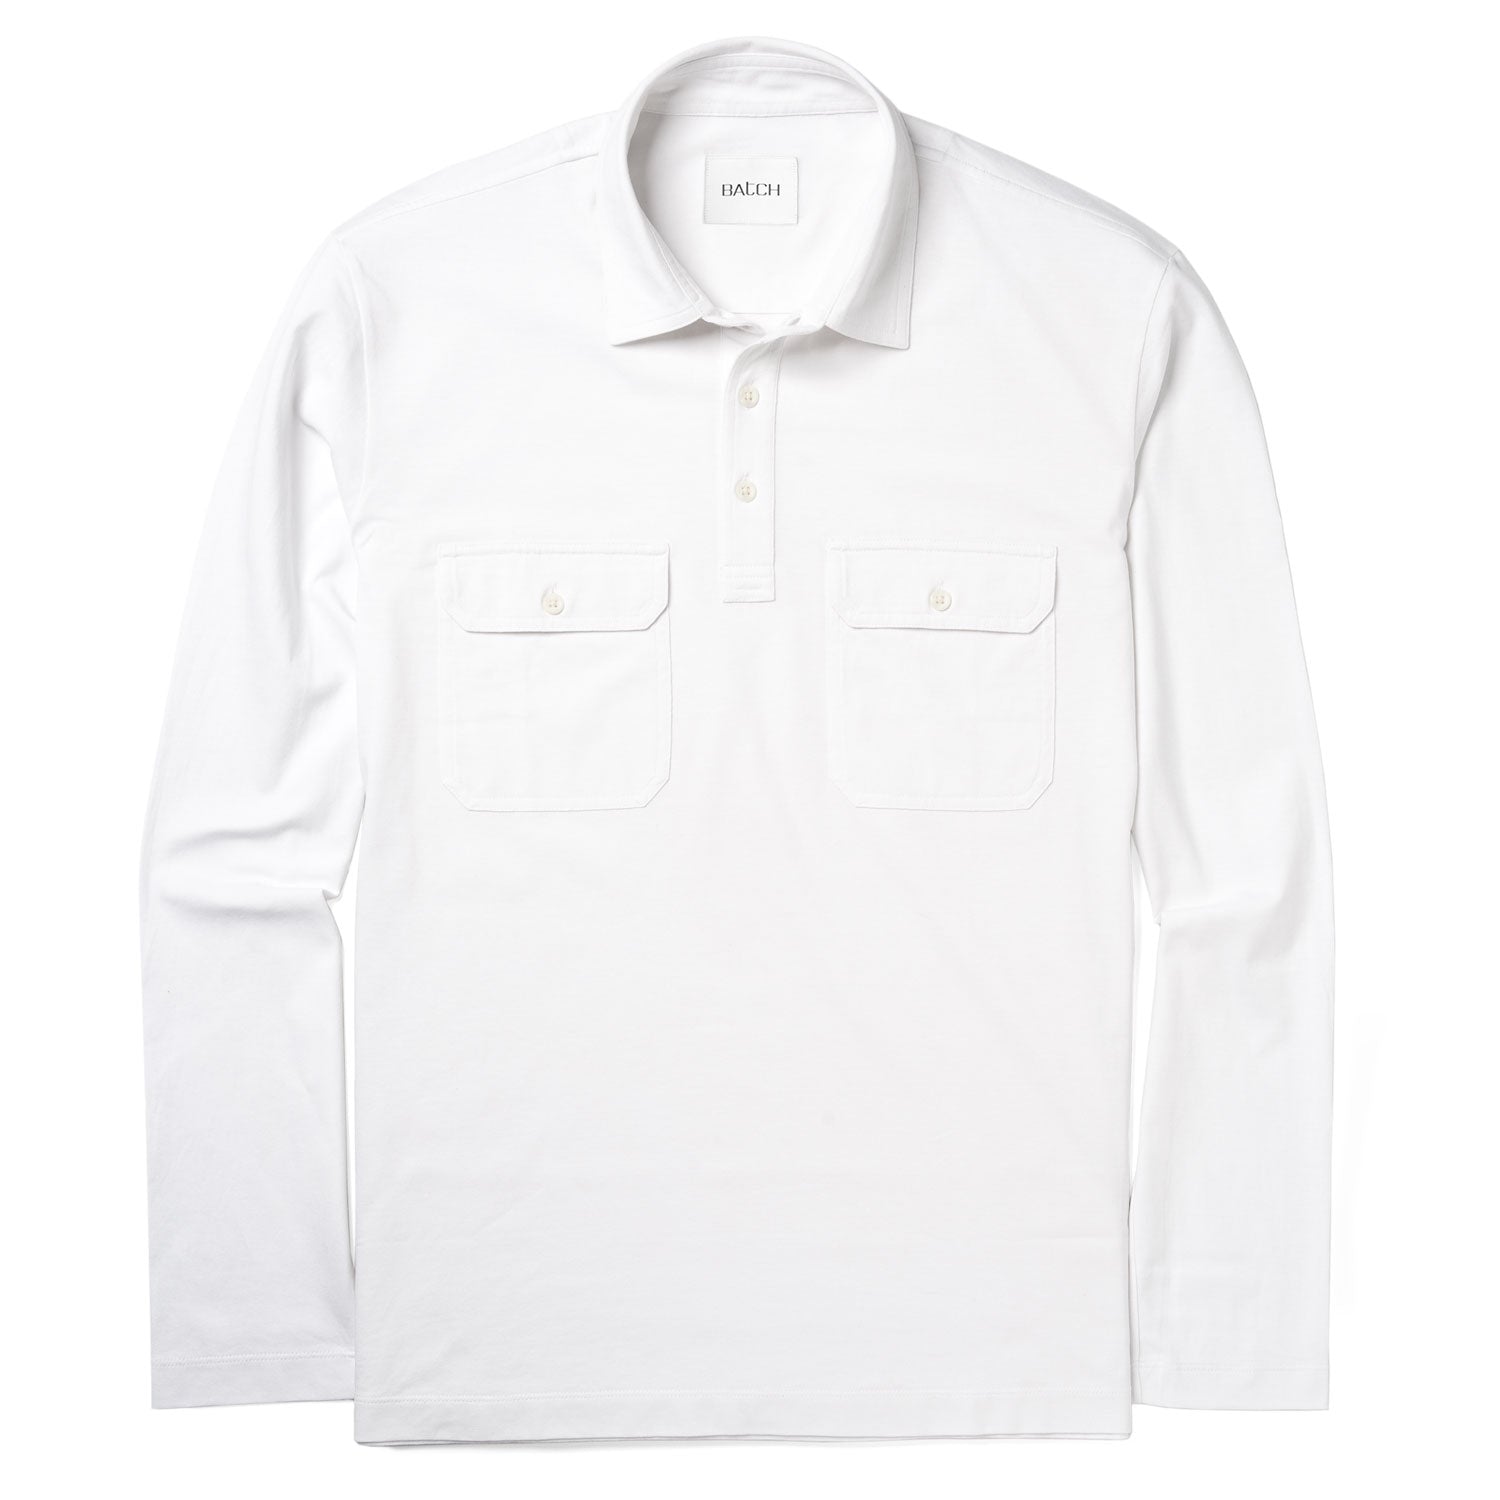 Constructor Polo Shirt –  Pure White Cotton Jersey